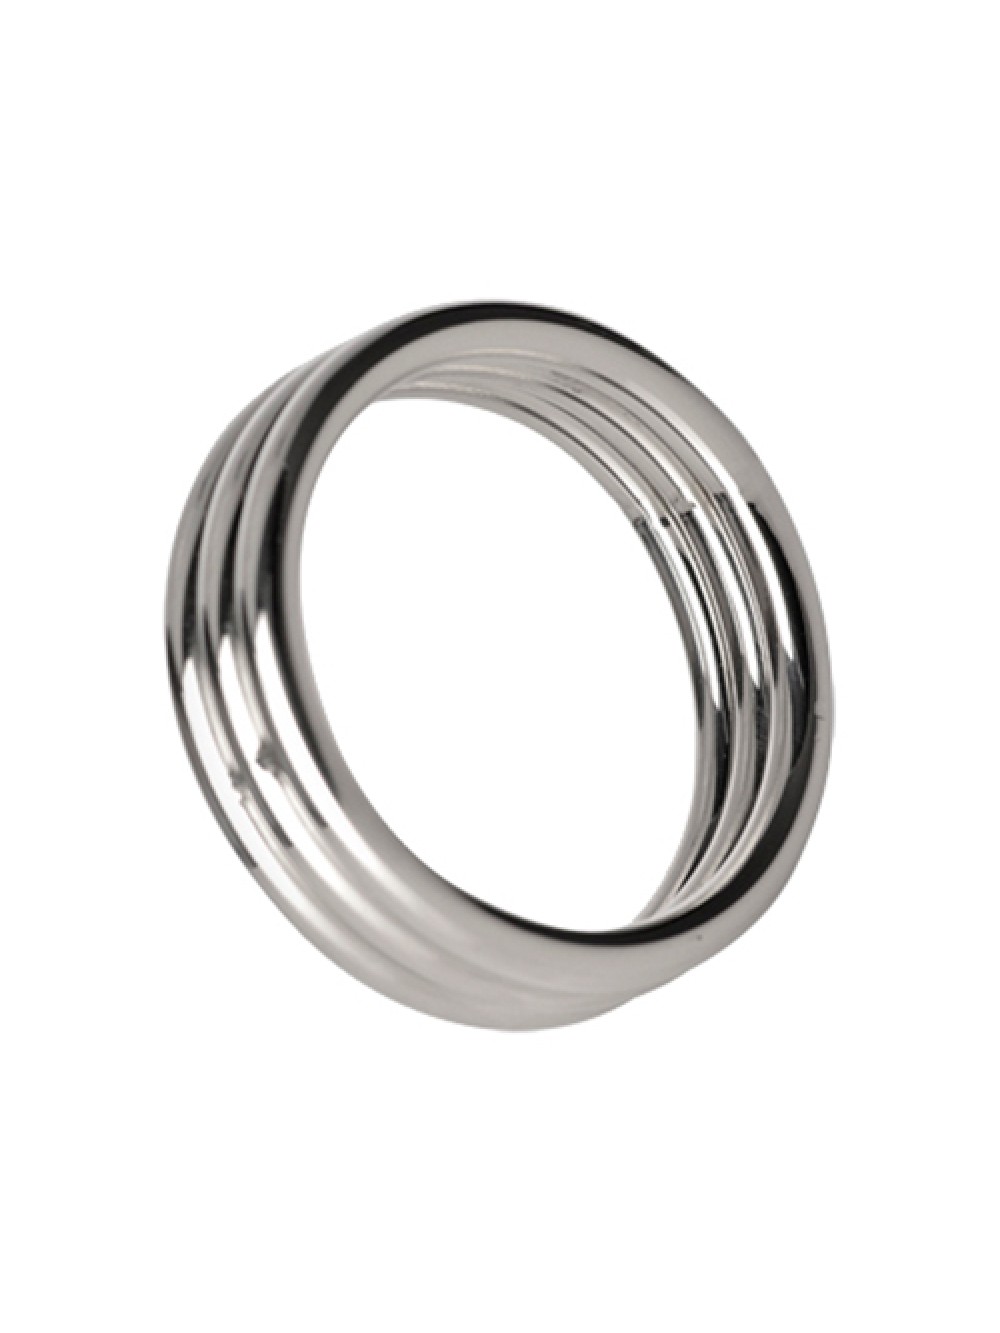 Echo 1.75 Inch Stainless Steel Triple Cock Ring 848518005632